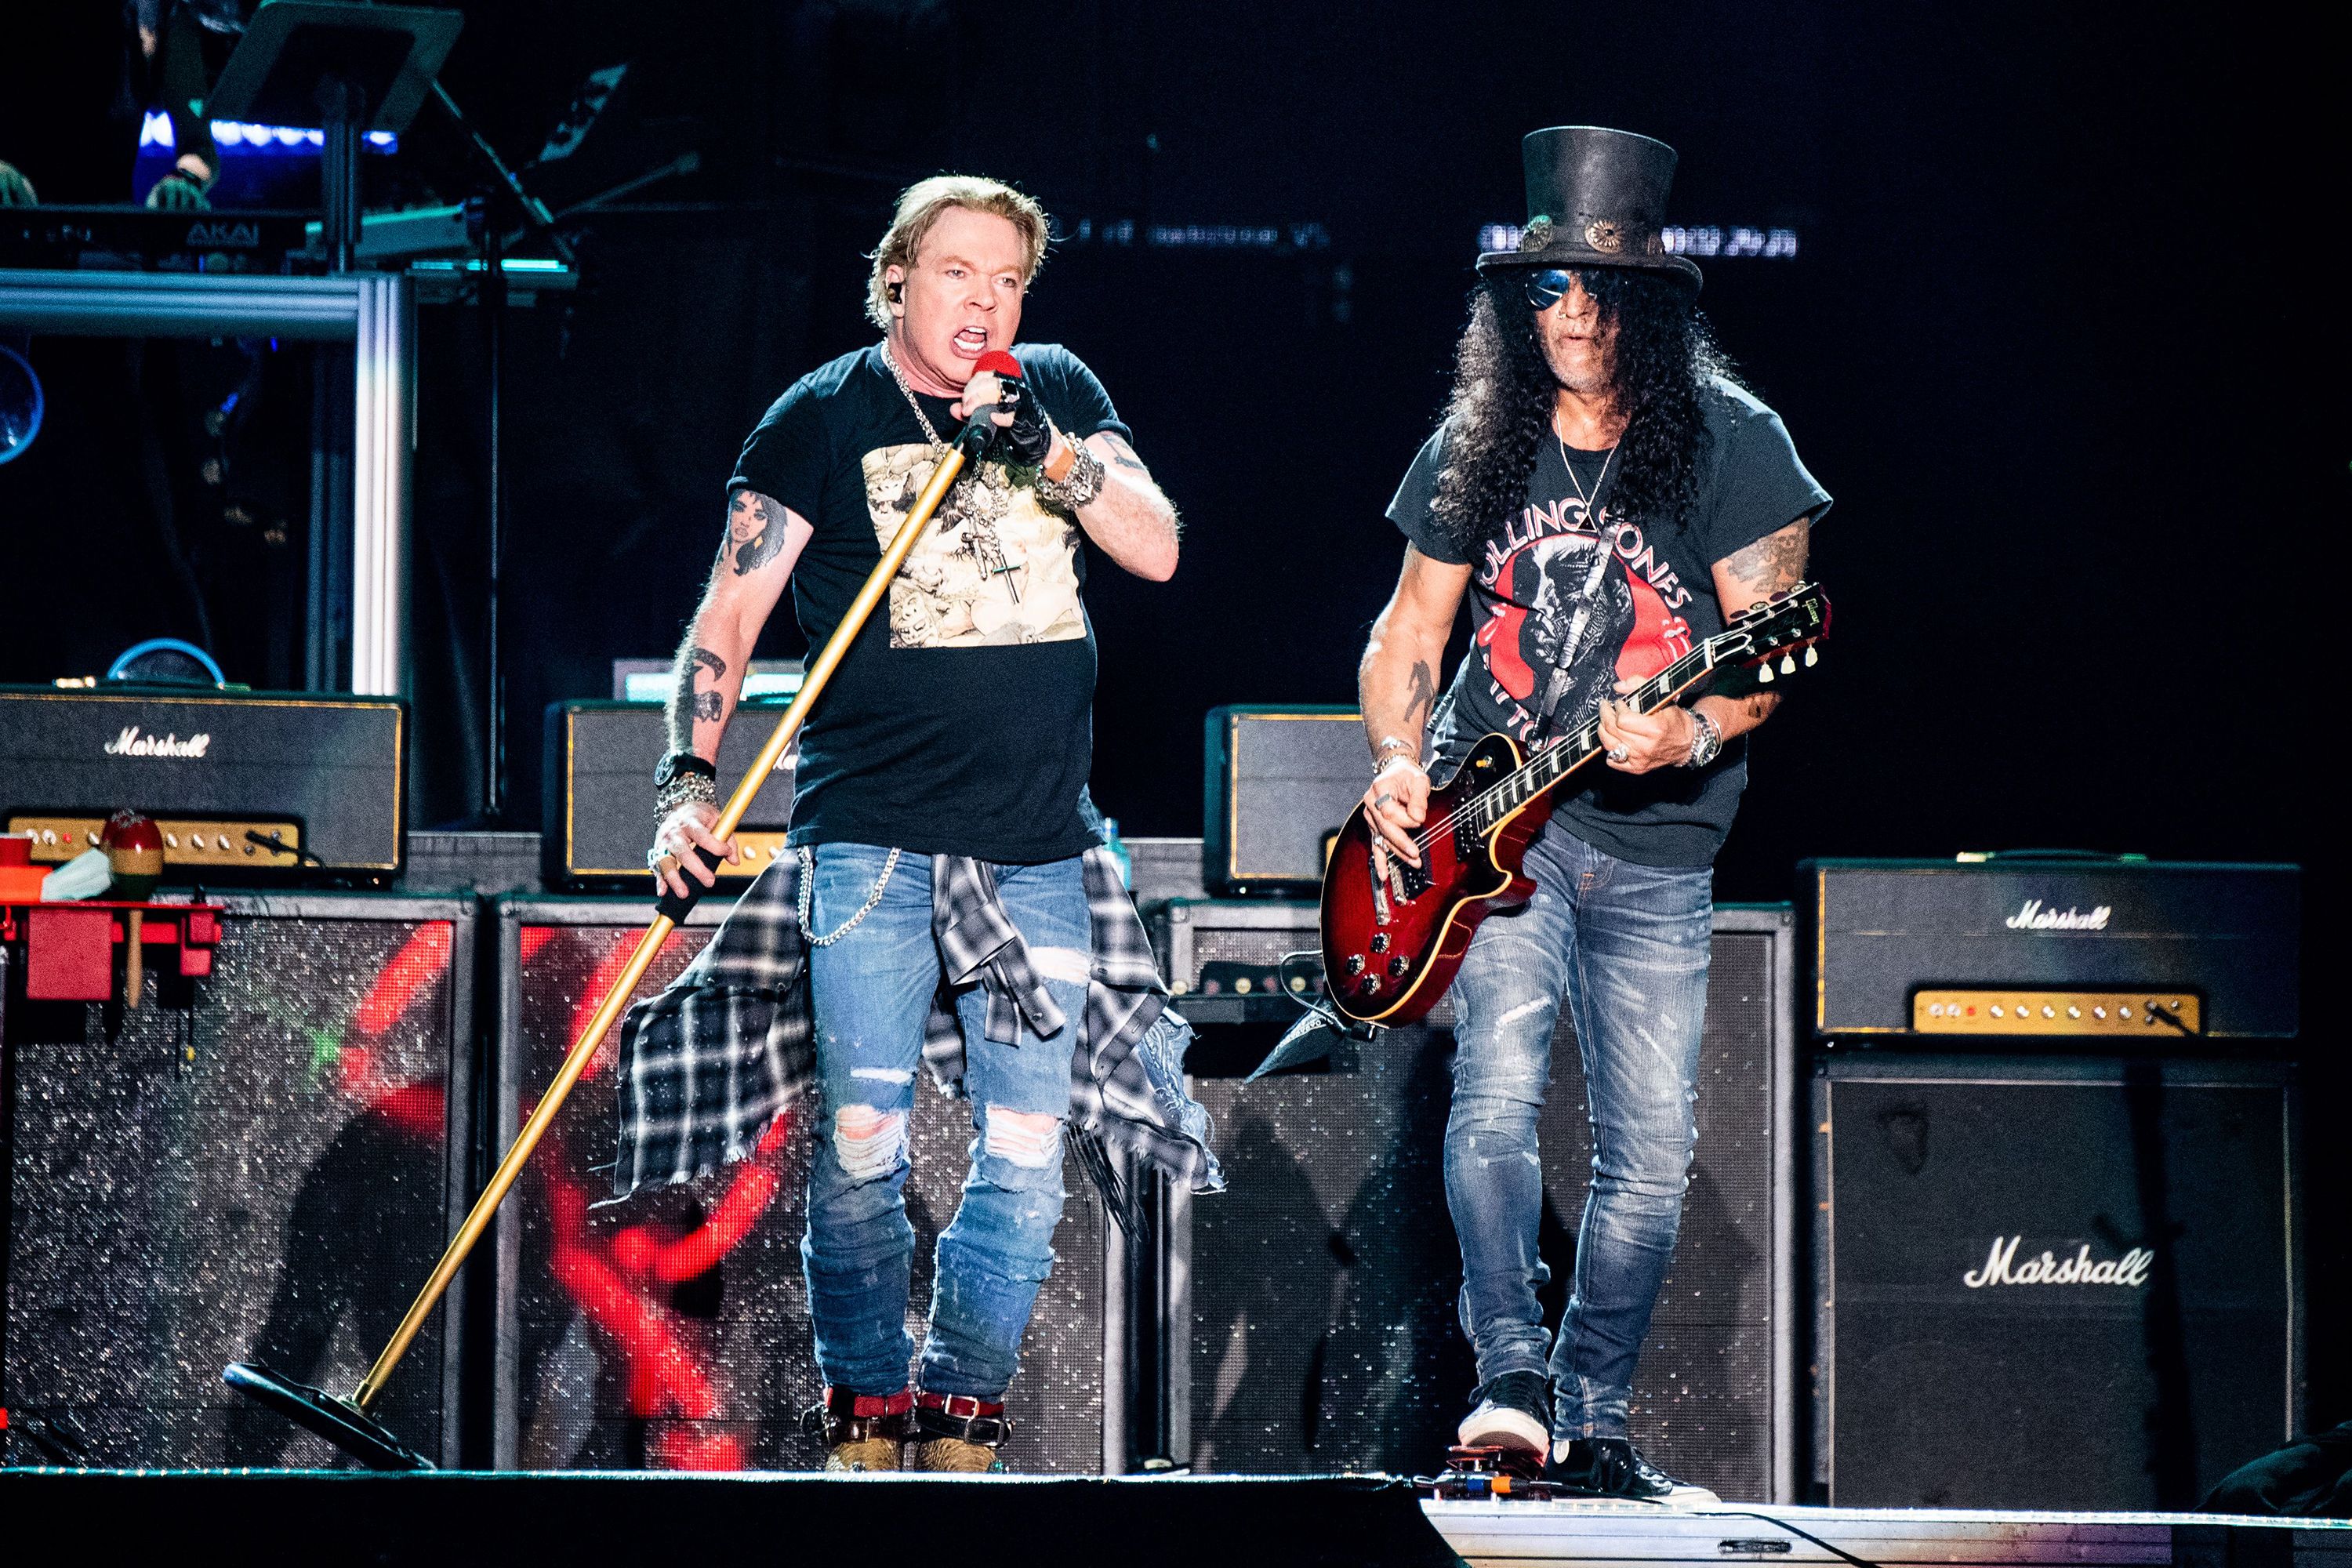 Guns N' Roses Stage Tech Confirms Band Has New Single Coming